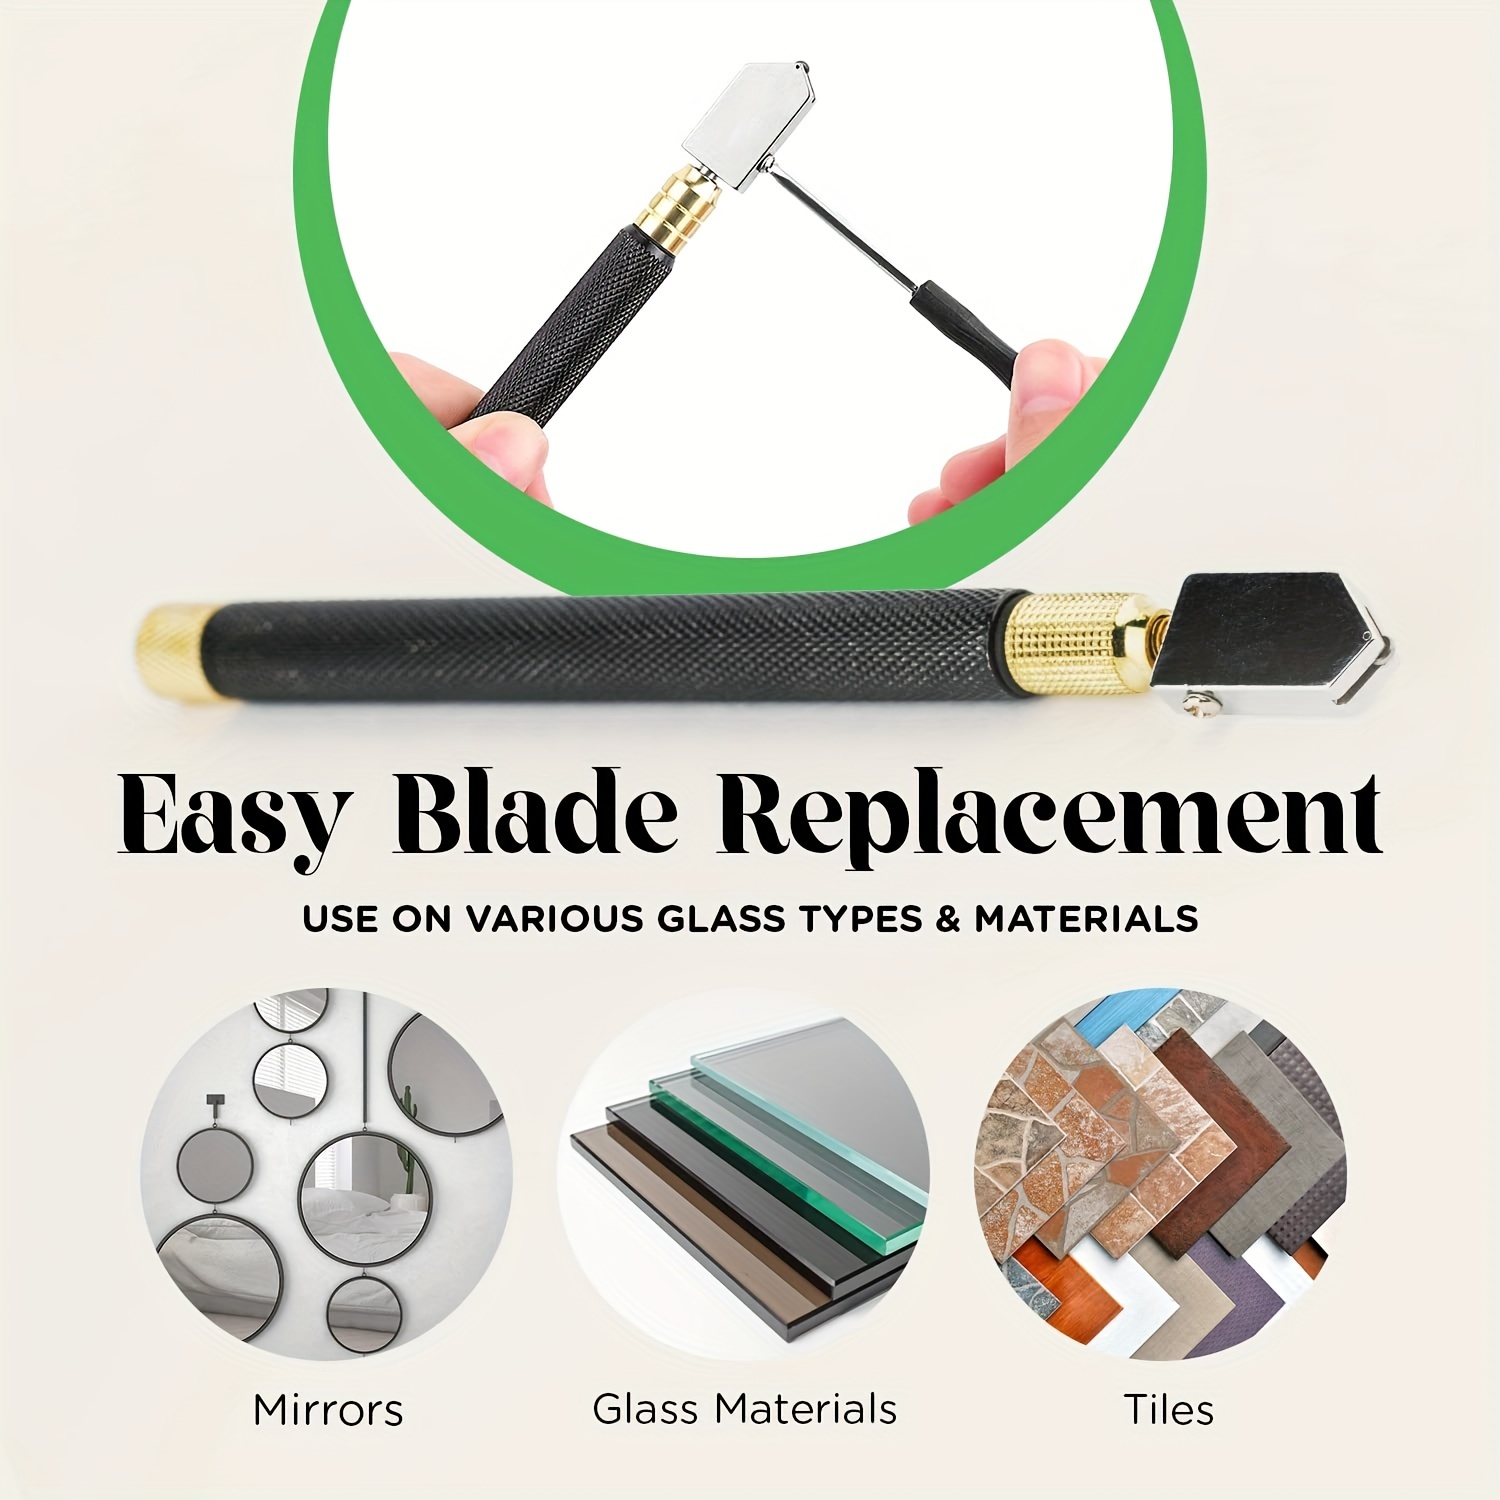 Glass & Mirror Cutting Tools - Overview